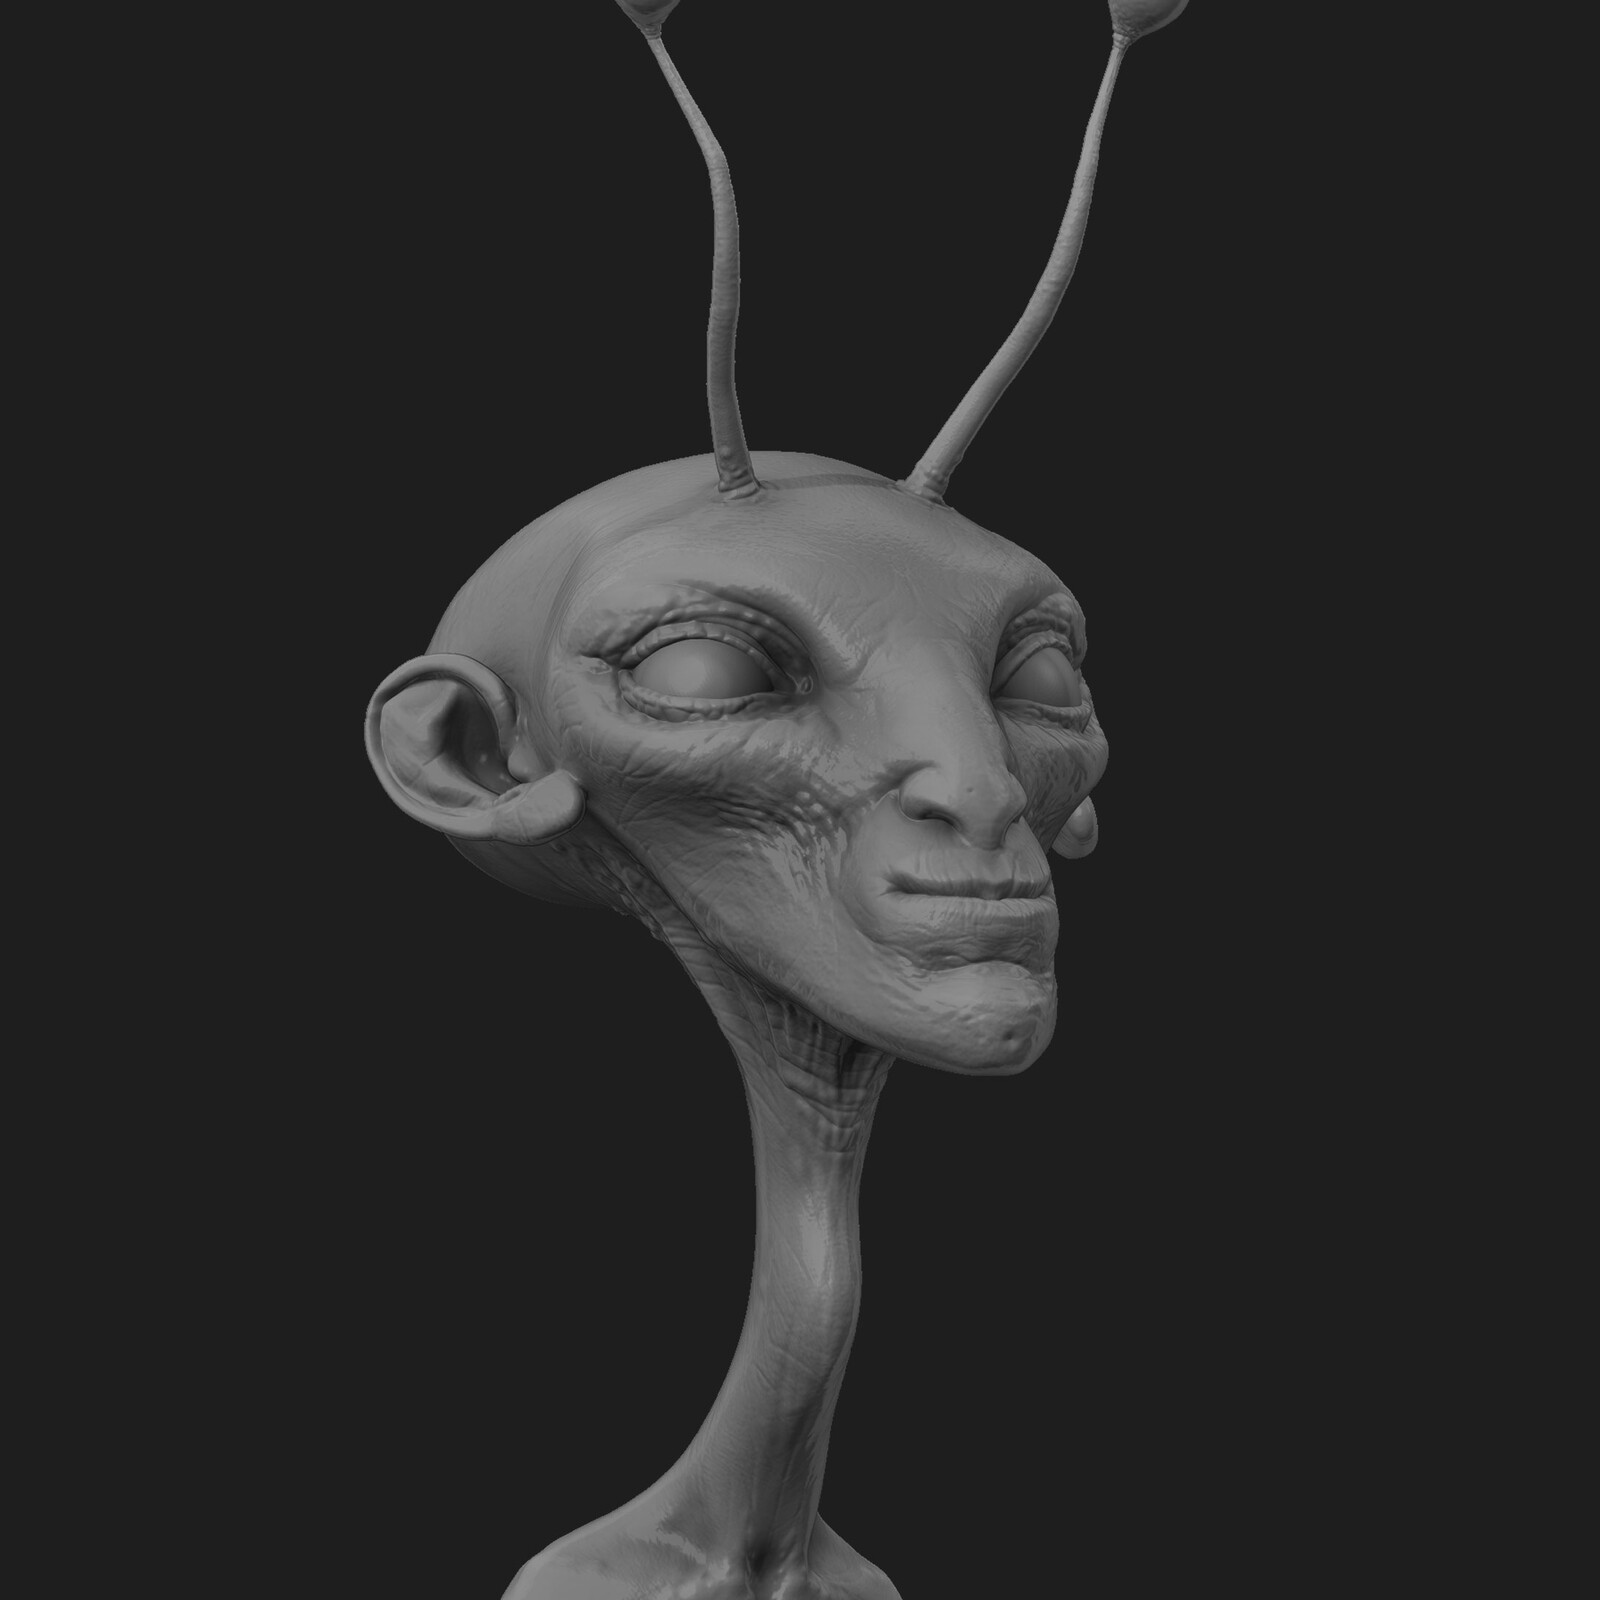 ZBrush BPR Passes combined